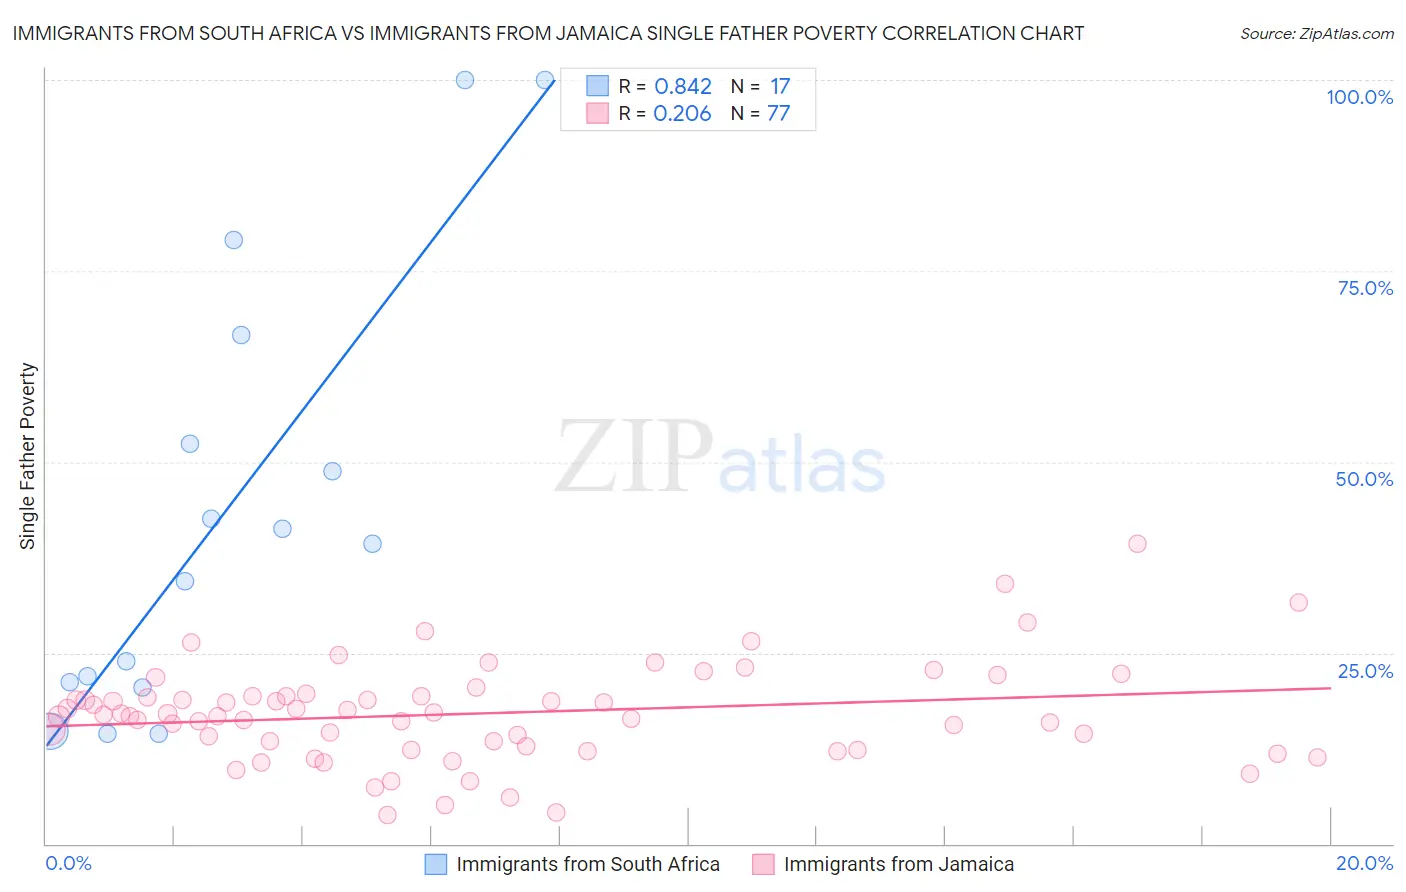 Immigrants from South Africa vs Immigrants from Jamaica Single Father Poverty